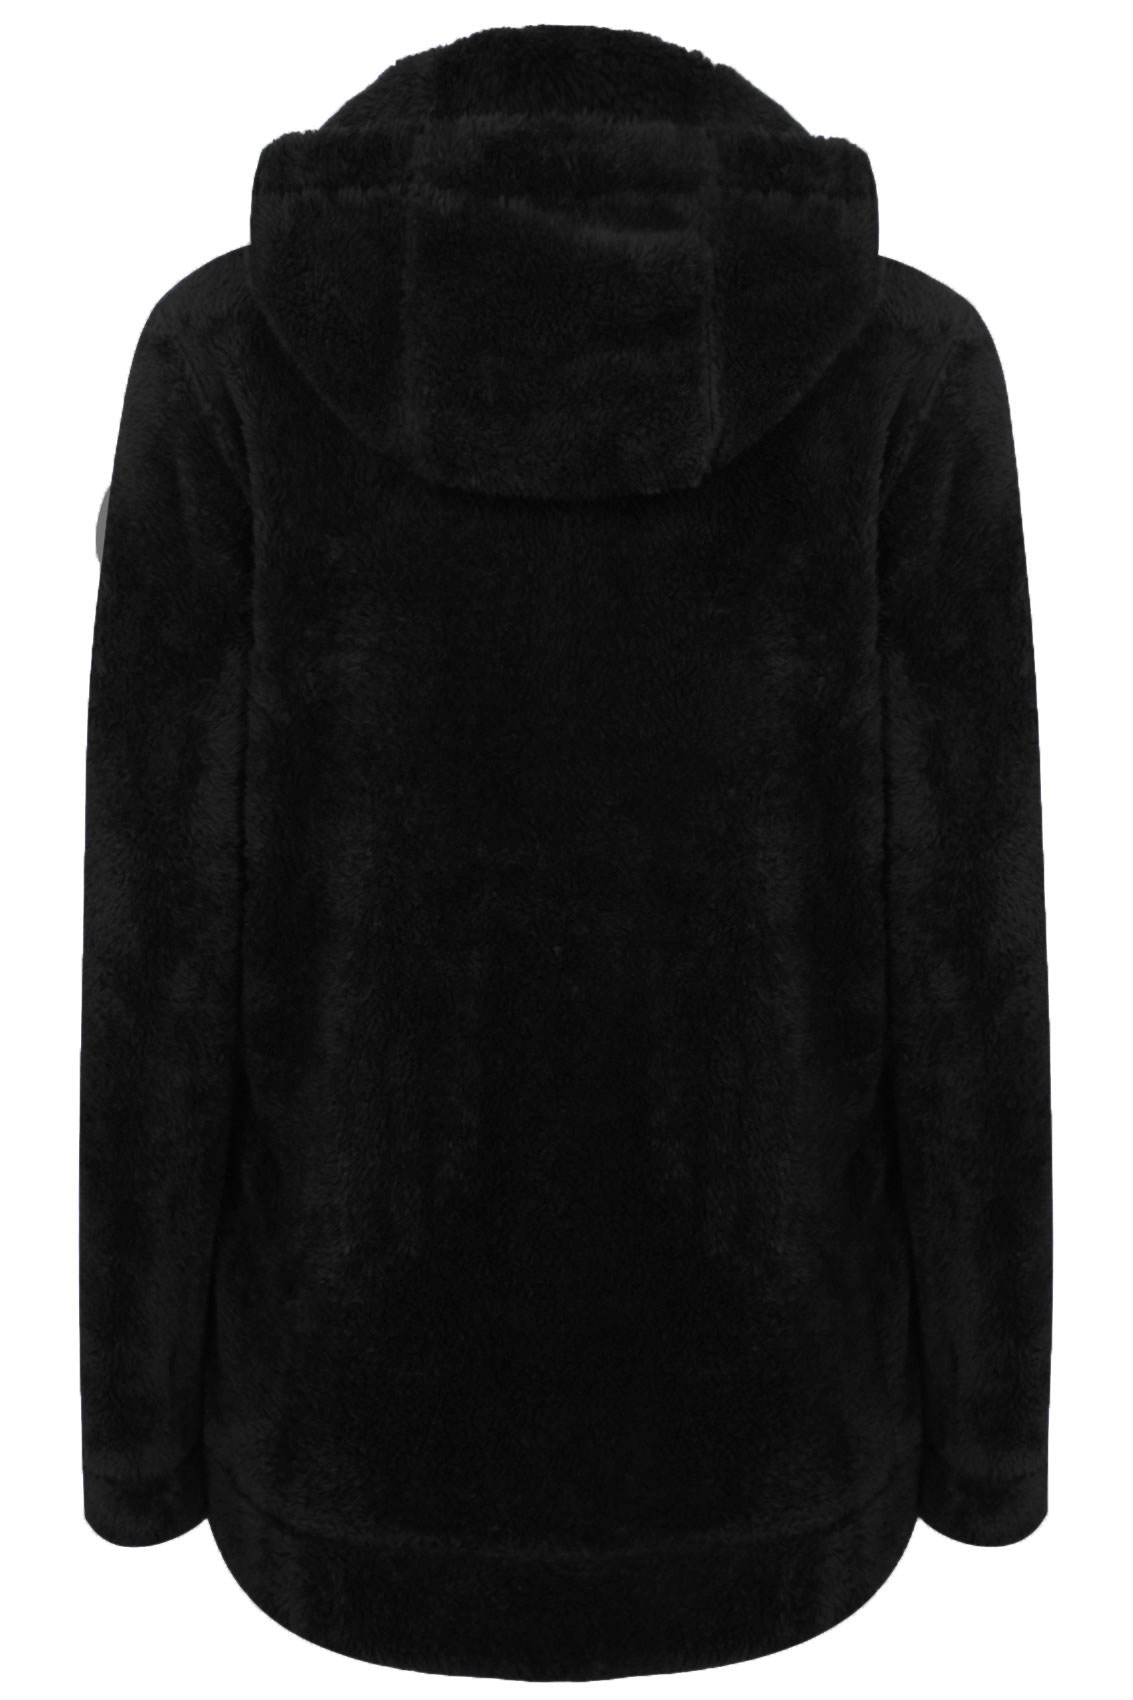 Black Plain Fluffy Hooded Fleece With Zip Plus Size 16 to 36